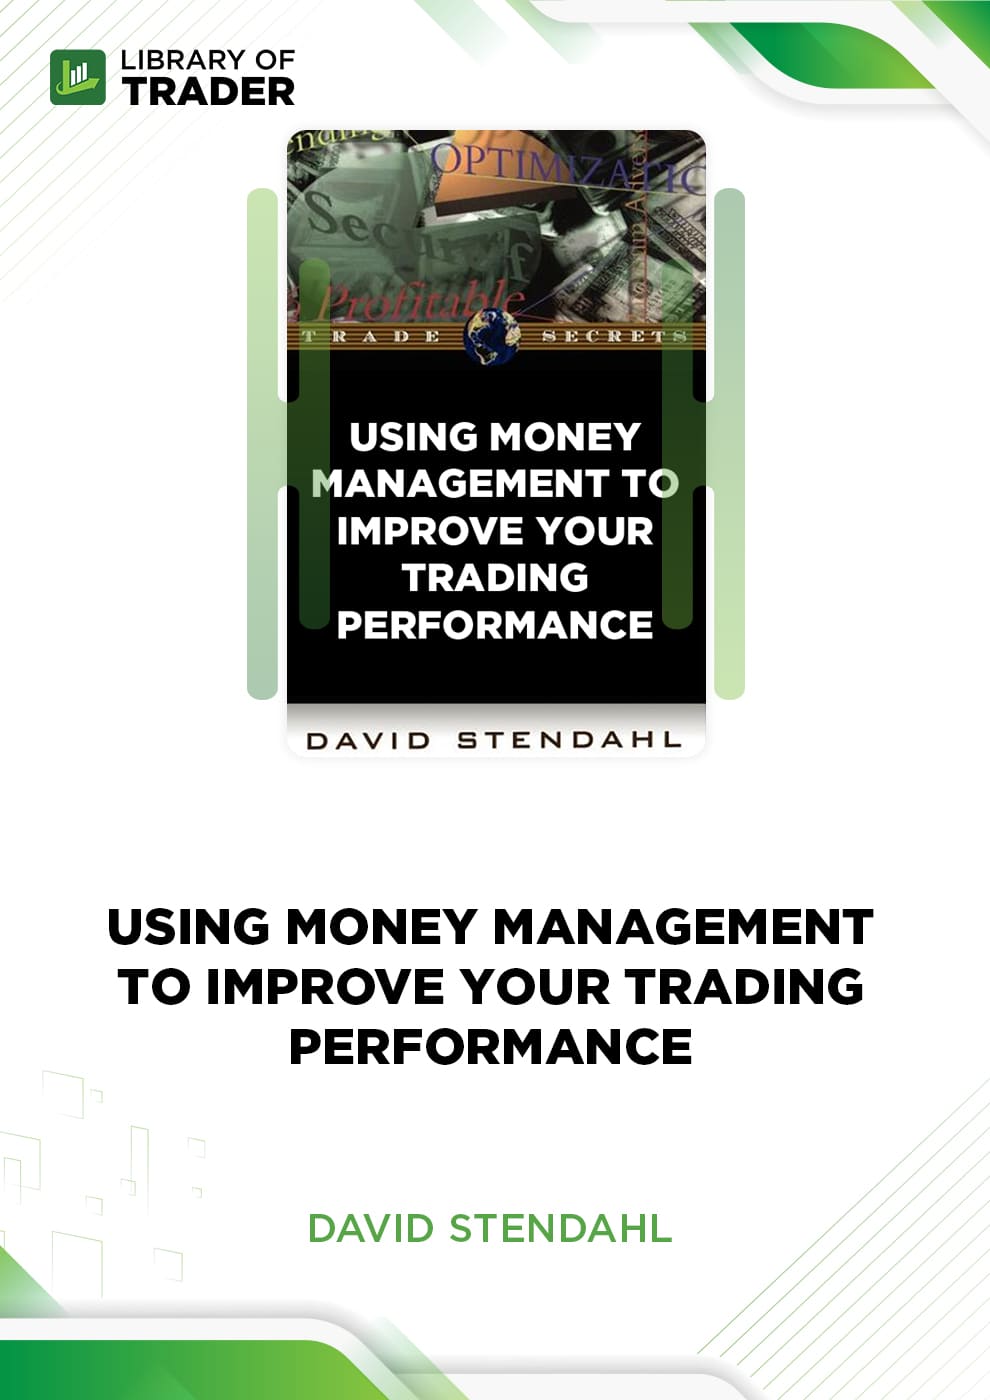 Using Money Management to Improve Your Trading Performance by David Stendahl